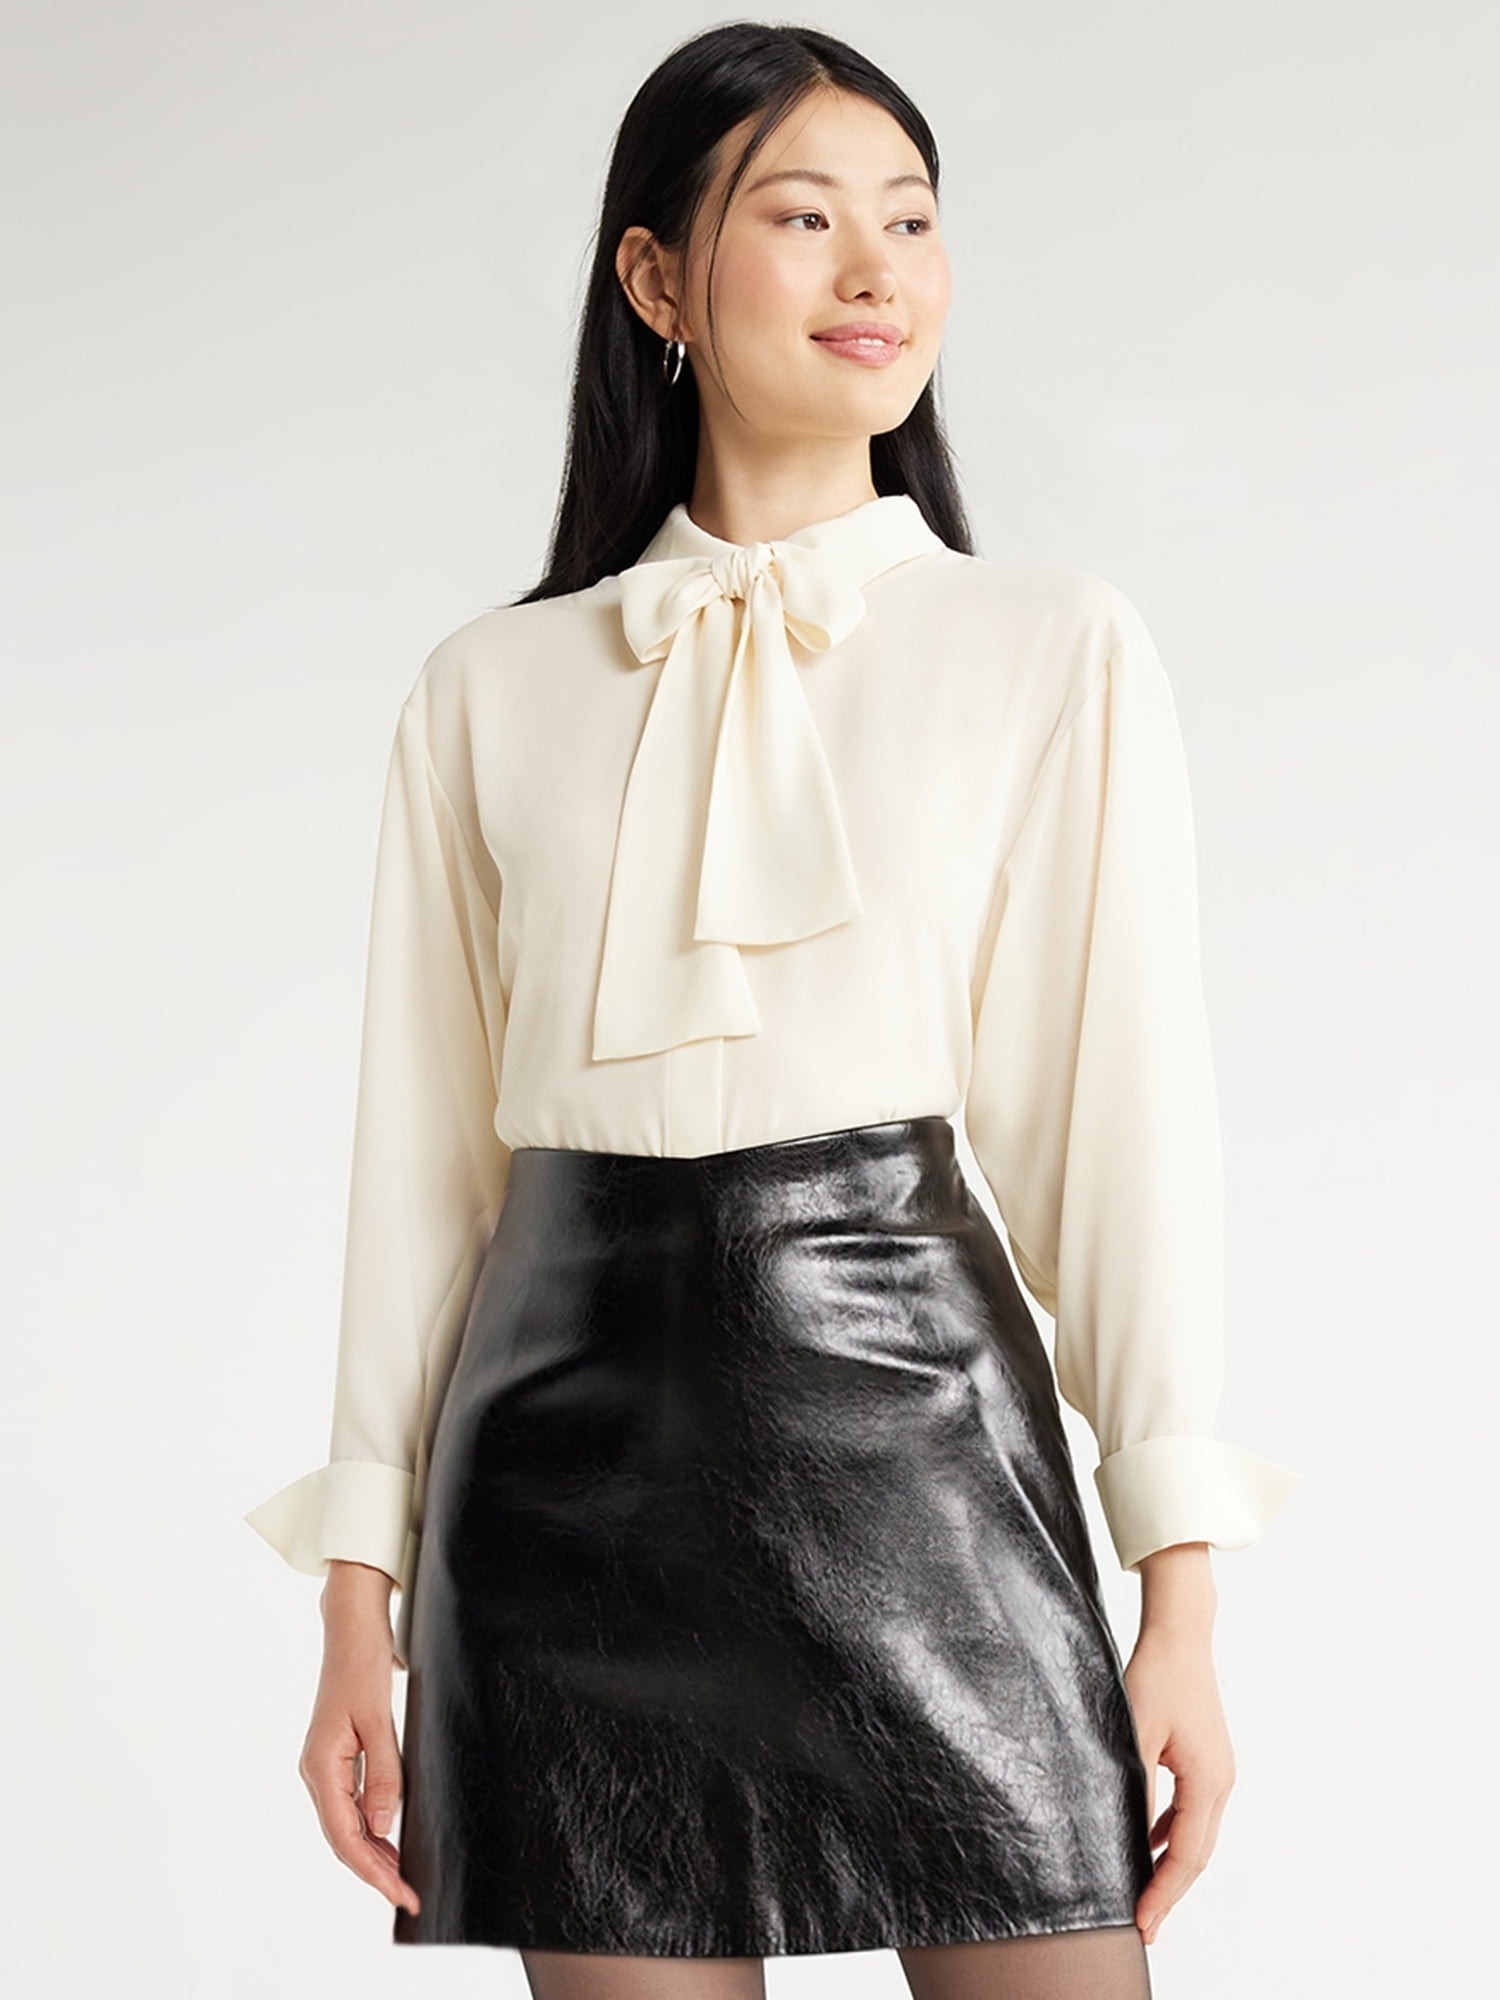 a model wearing the cream-colored top with a black leather skirt